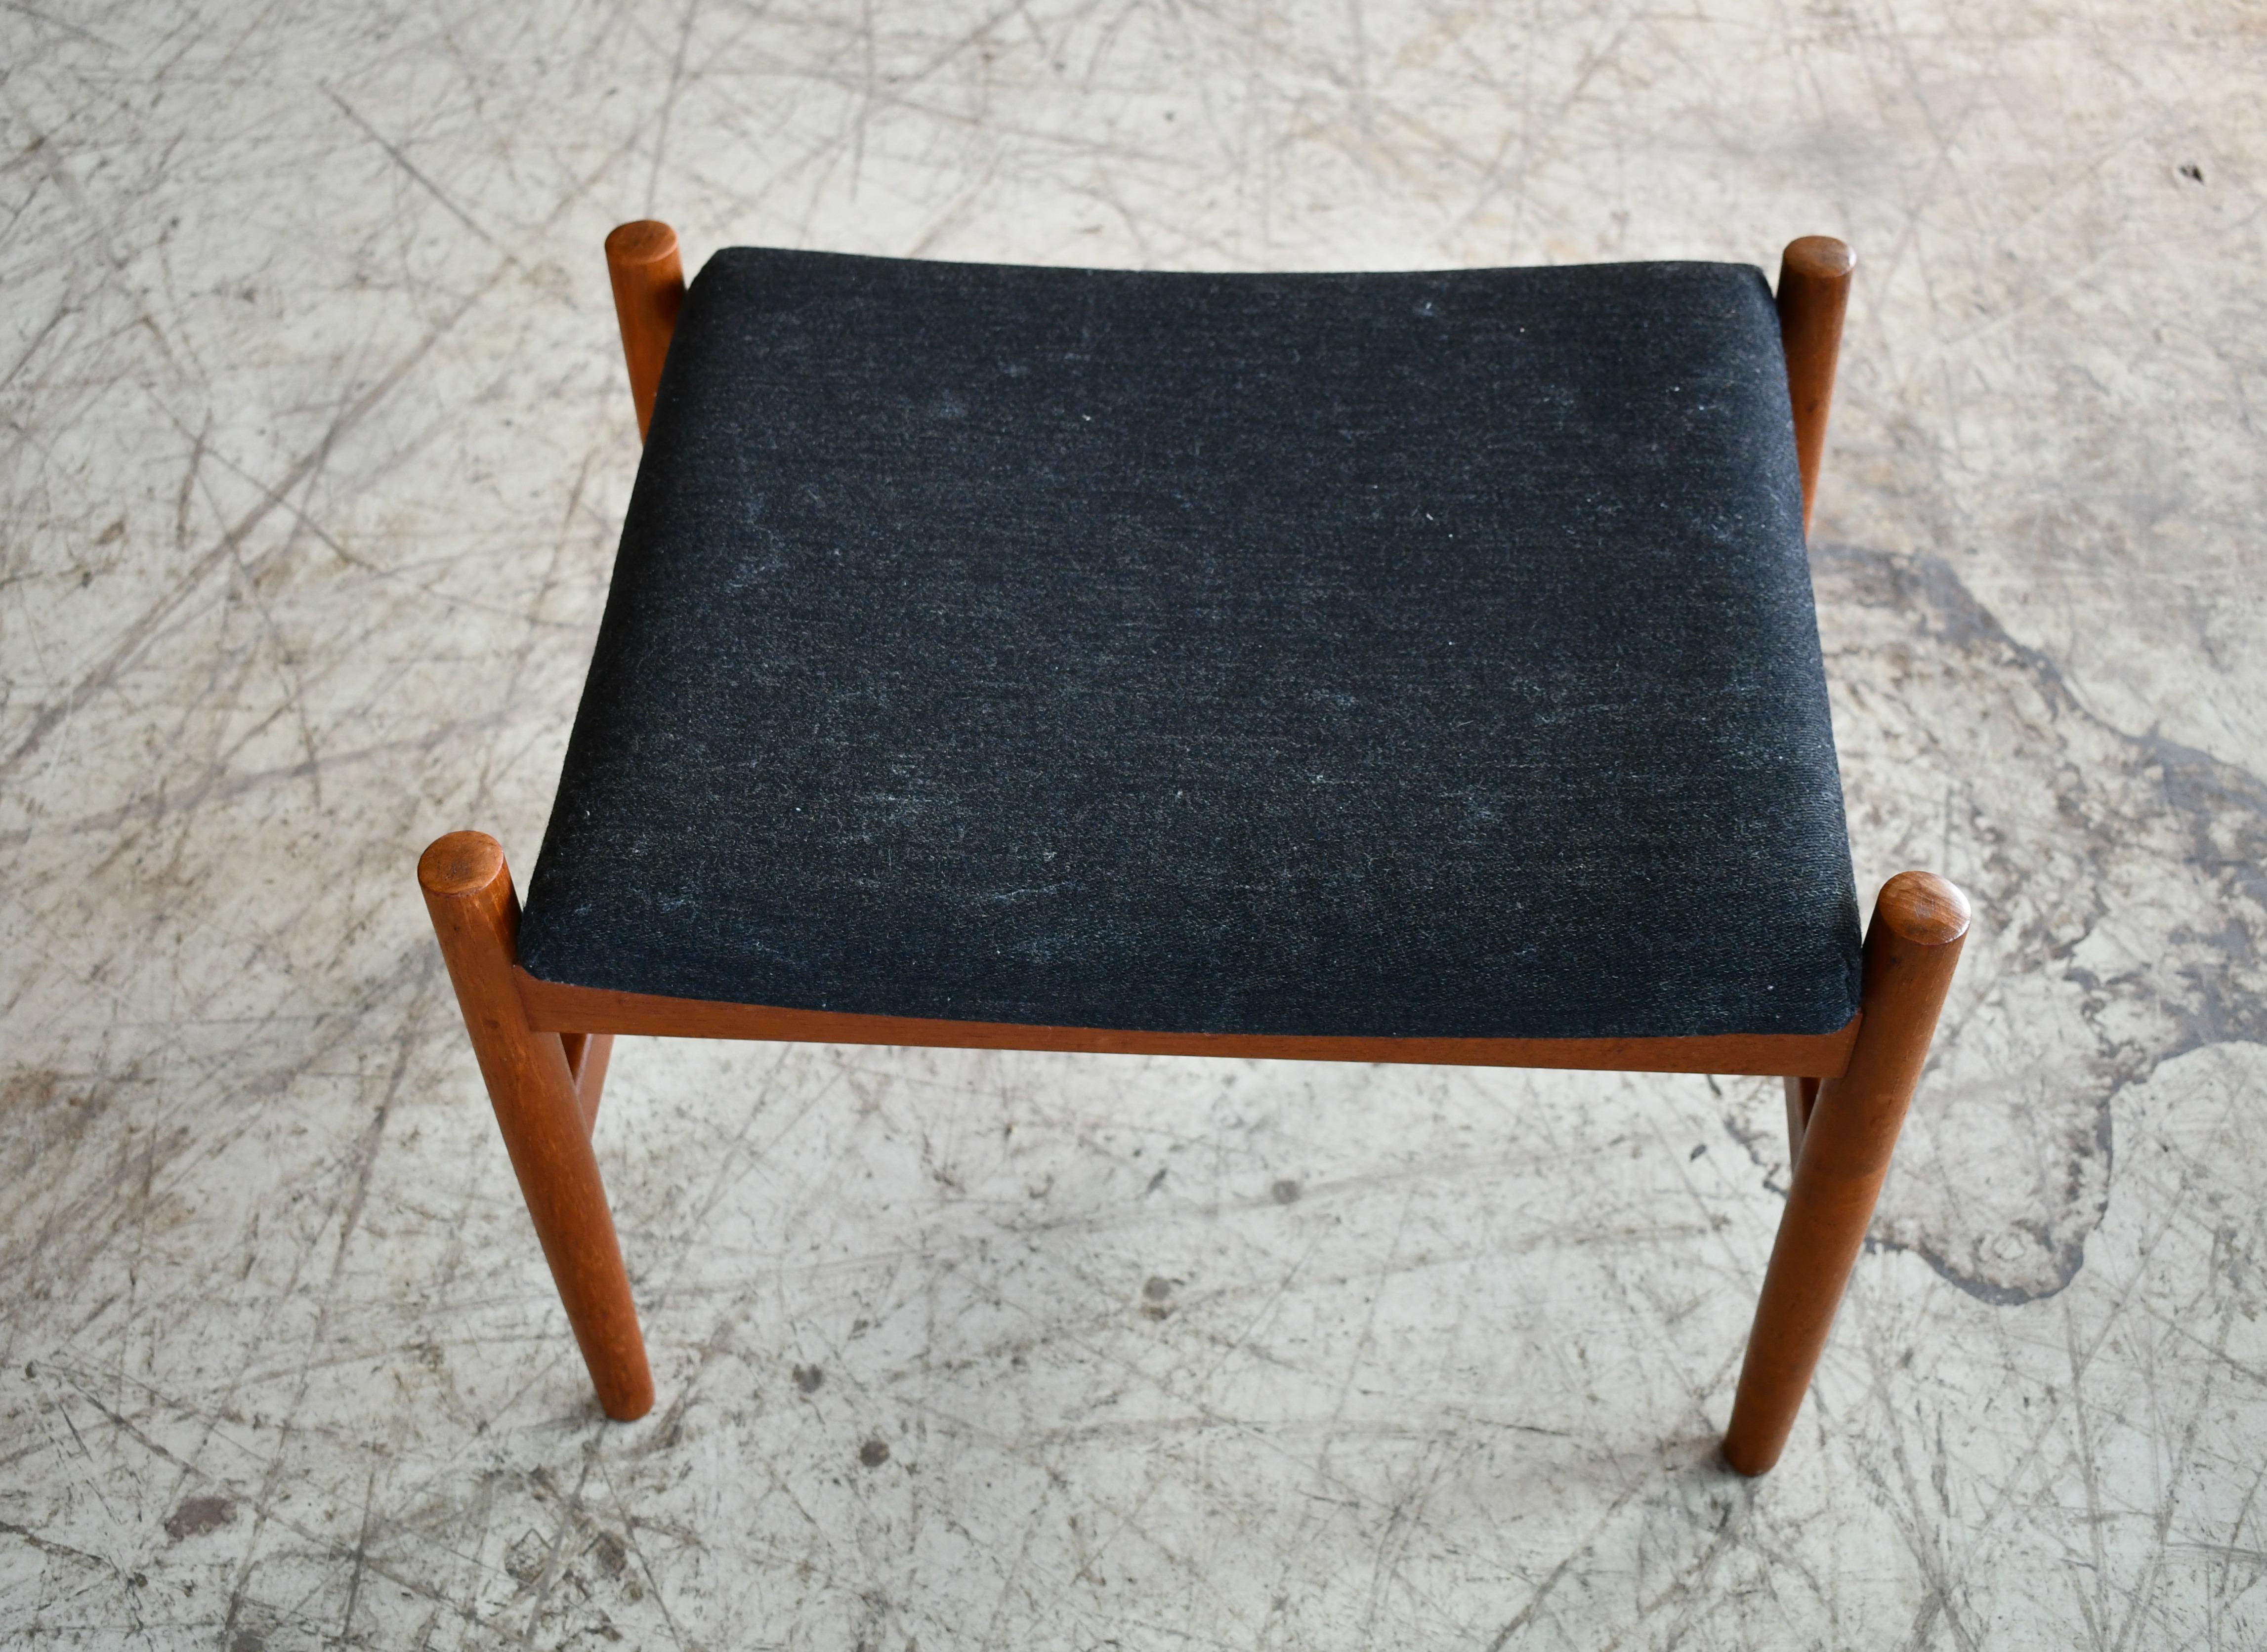 Spottrup's Classic and sought after ottoman featuring a solid teak frame and a fabric cushion. A great Danish midcentury design that could be paired with a chair as an ottoman or used alone as a stool. Overall very good condition. We offer